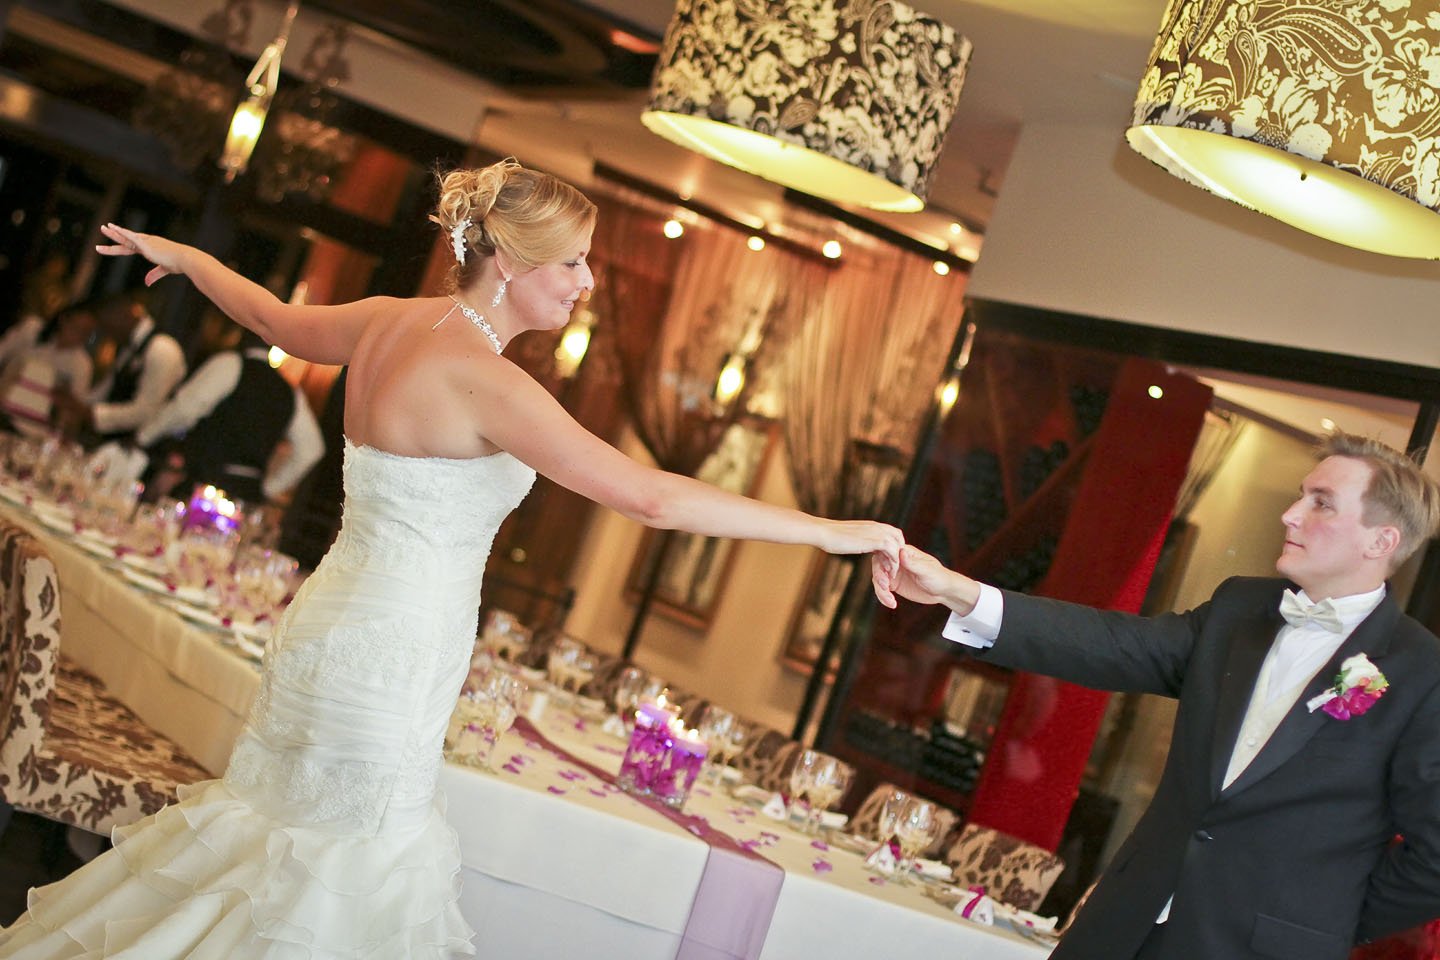 Wedding couple in an open hold, standing apart, facing each other during their dance.